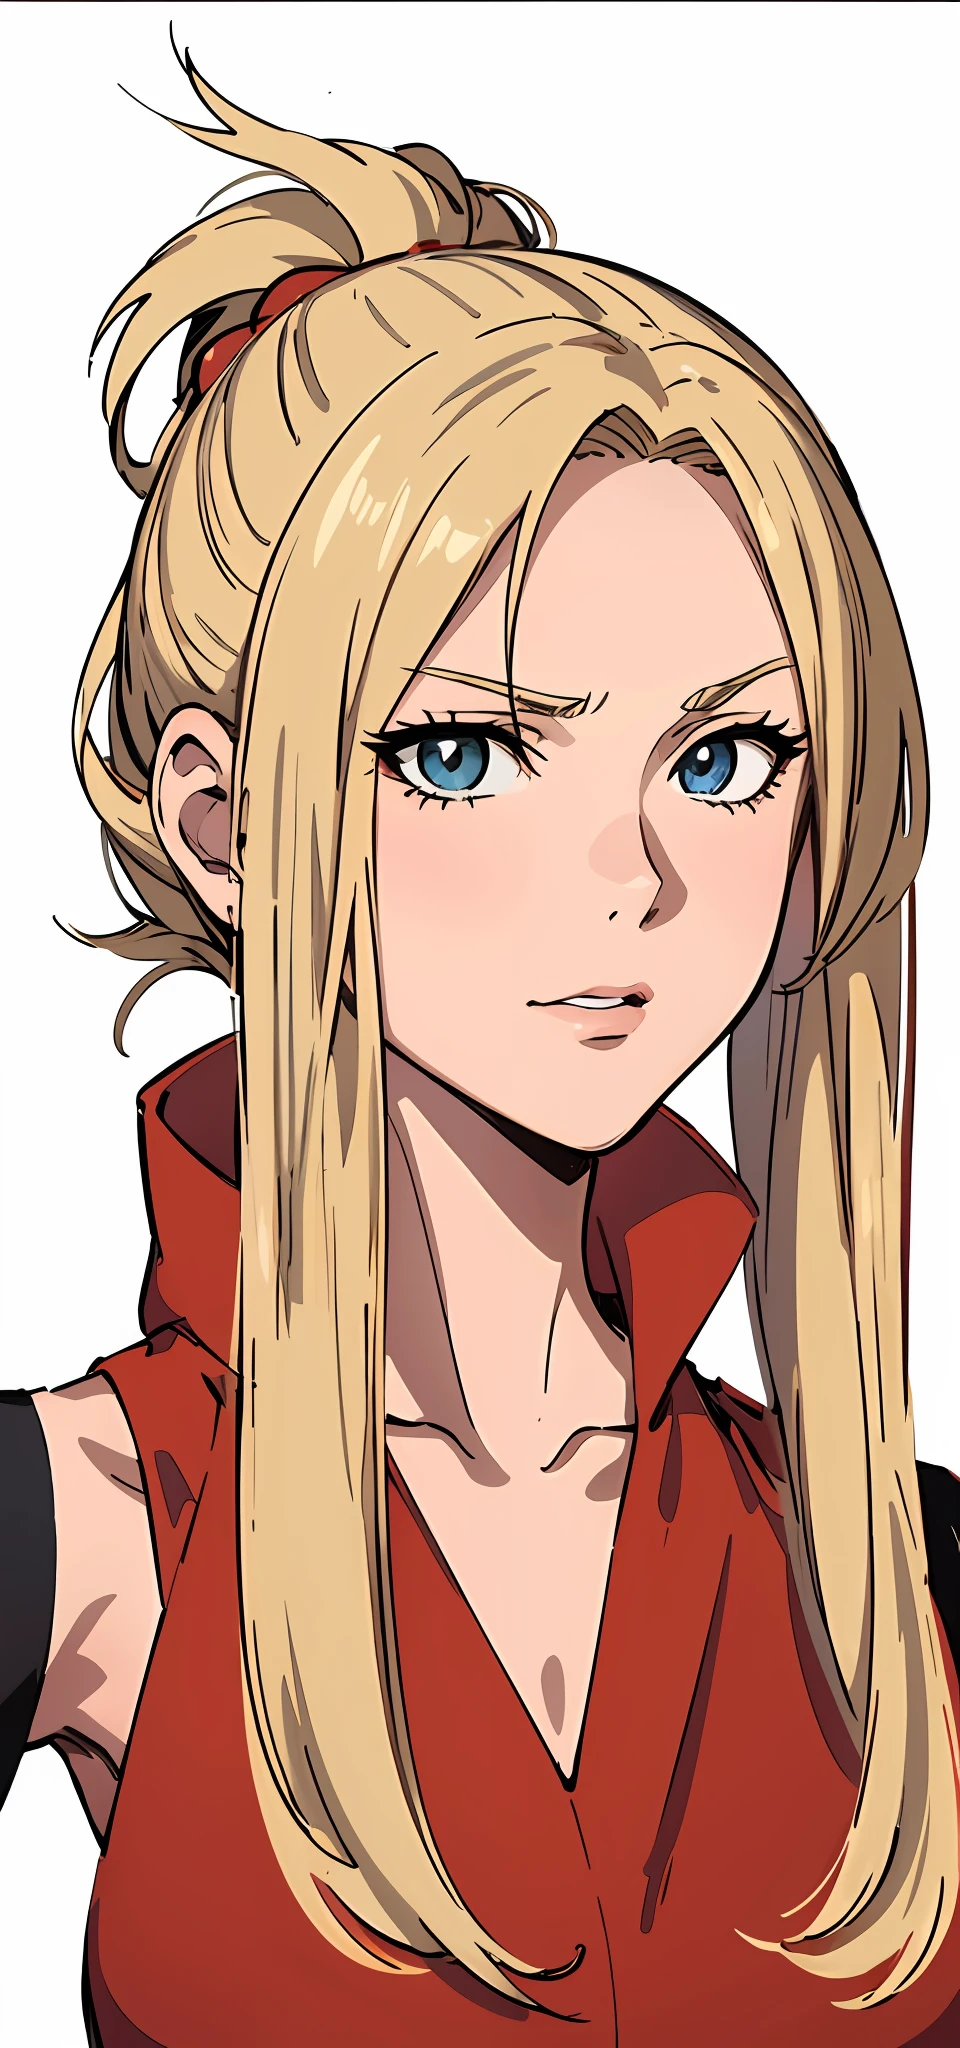 (Anime) . Anime fille aux cheveux blonds et aux yeux bleus en chemise rouge, Edelgard Fire Emblem, Edelgard de Fire Emblem, portrait of a female anime hero, female anime character, Ann Takamaki de Persona 5, anime character, Hannah Yata, Portrait de Ninja Slayer, Profil de la femme anime, anime character portrait, official artwork, Haruno Sakura, Valentina Shuffle . (Masterpiece : 1,8), k quality, final fantasy artwork concept, detailed manga eyes, detailed hair, detailed clothes, detailed body, cleaner designs, detailed face pronounced, shiny objects like jewels, see creases on clothes, more coherent clothing, more rounded eyes transparent liquid globular, more colors, more coherent clothing , correct the features of the clothes, better eyes contour, better shoulders, really colorful, coarser line, black line, finishing . (coarser line) (black line) (homogeneous rendering: 1.3)